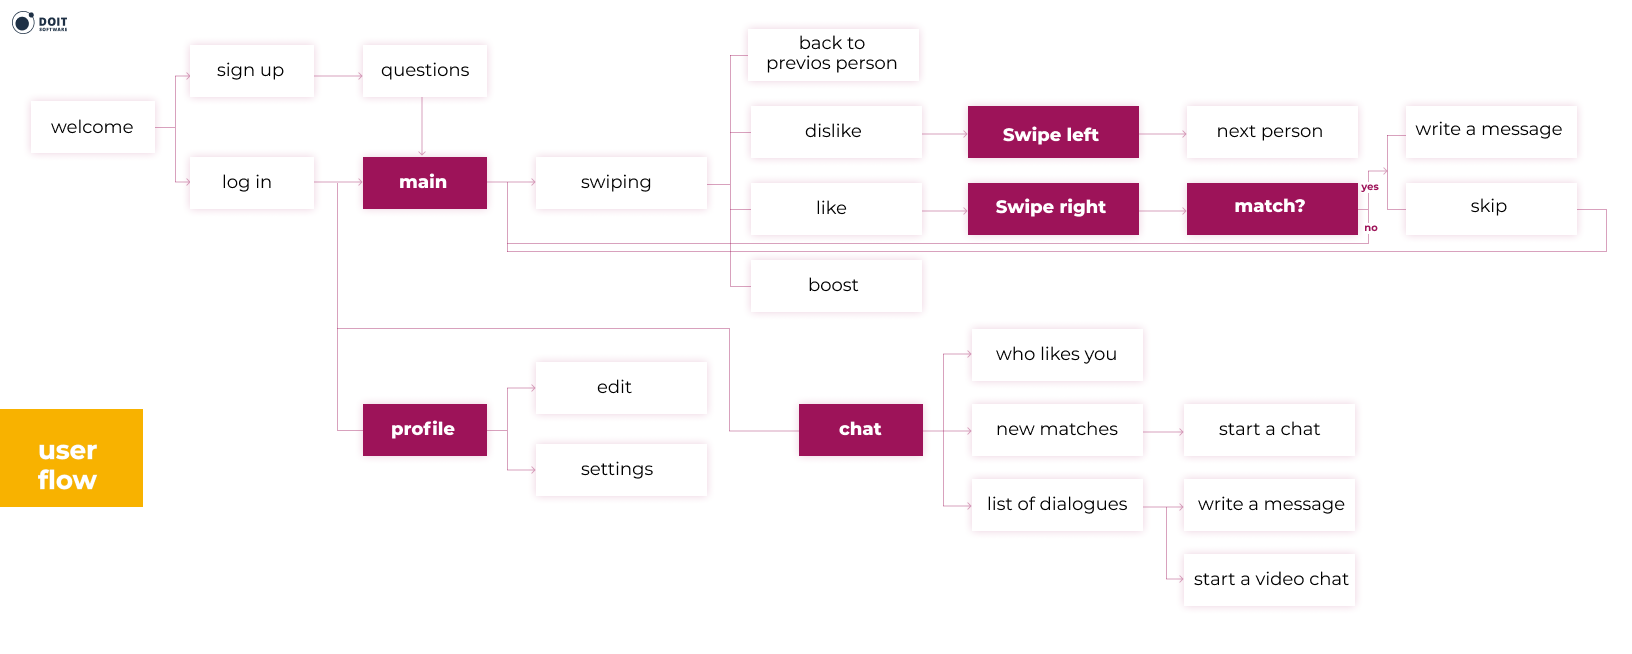 user flow cover how to create a dating app